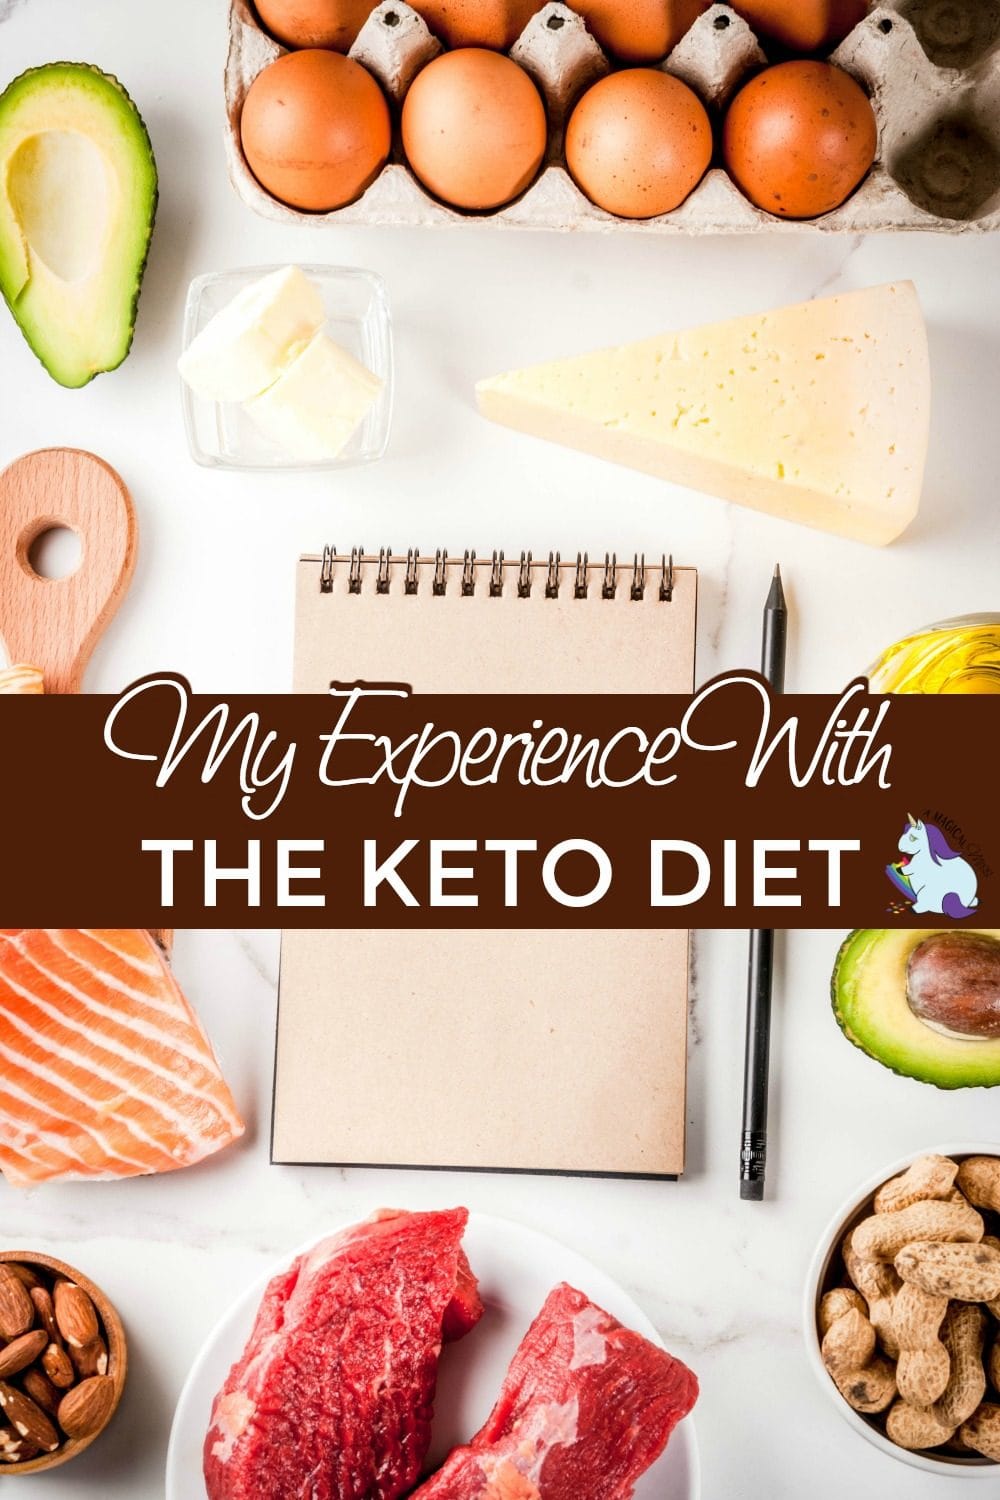 Low carb foods, healthy fat foods surrounding a notebook for the keto diet